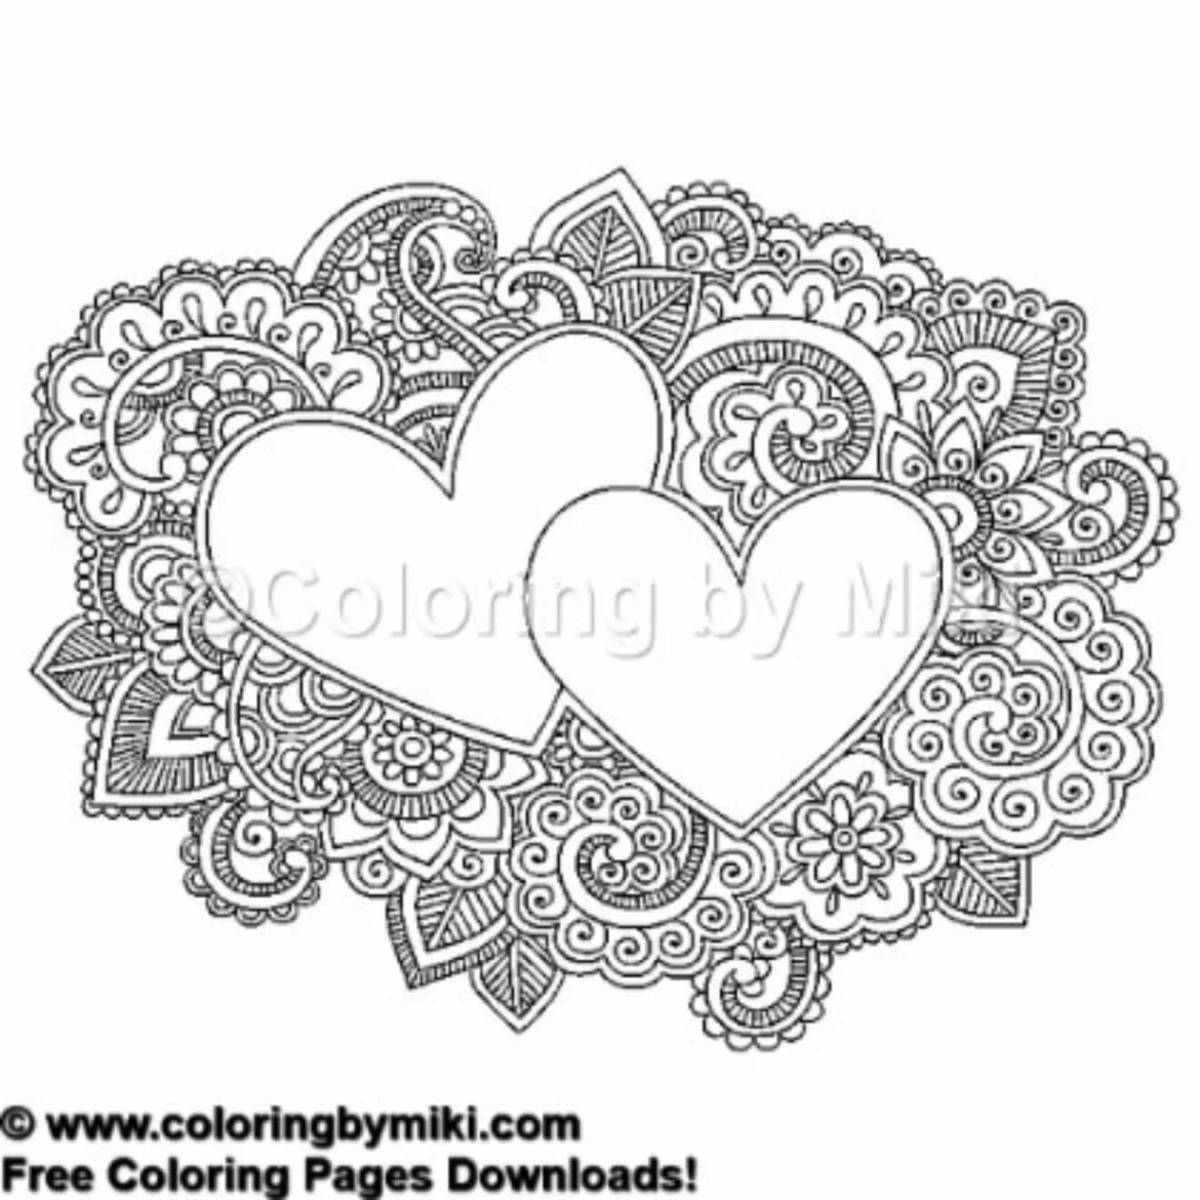 Serendipitous love antistress coloring page